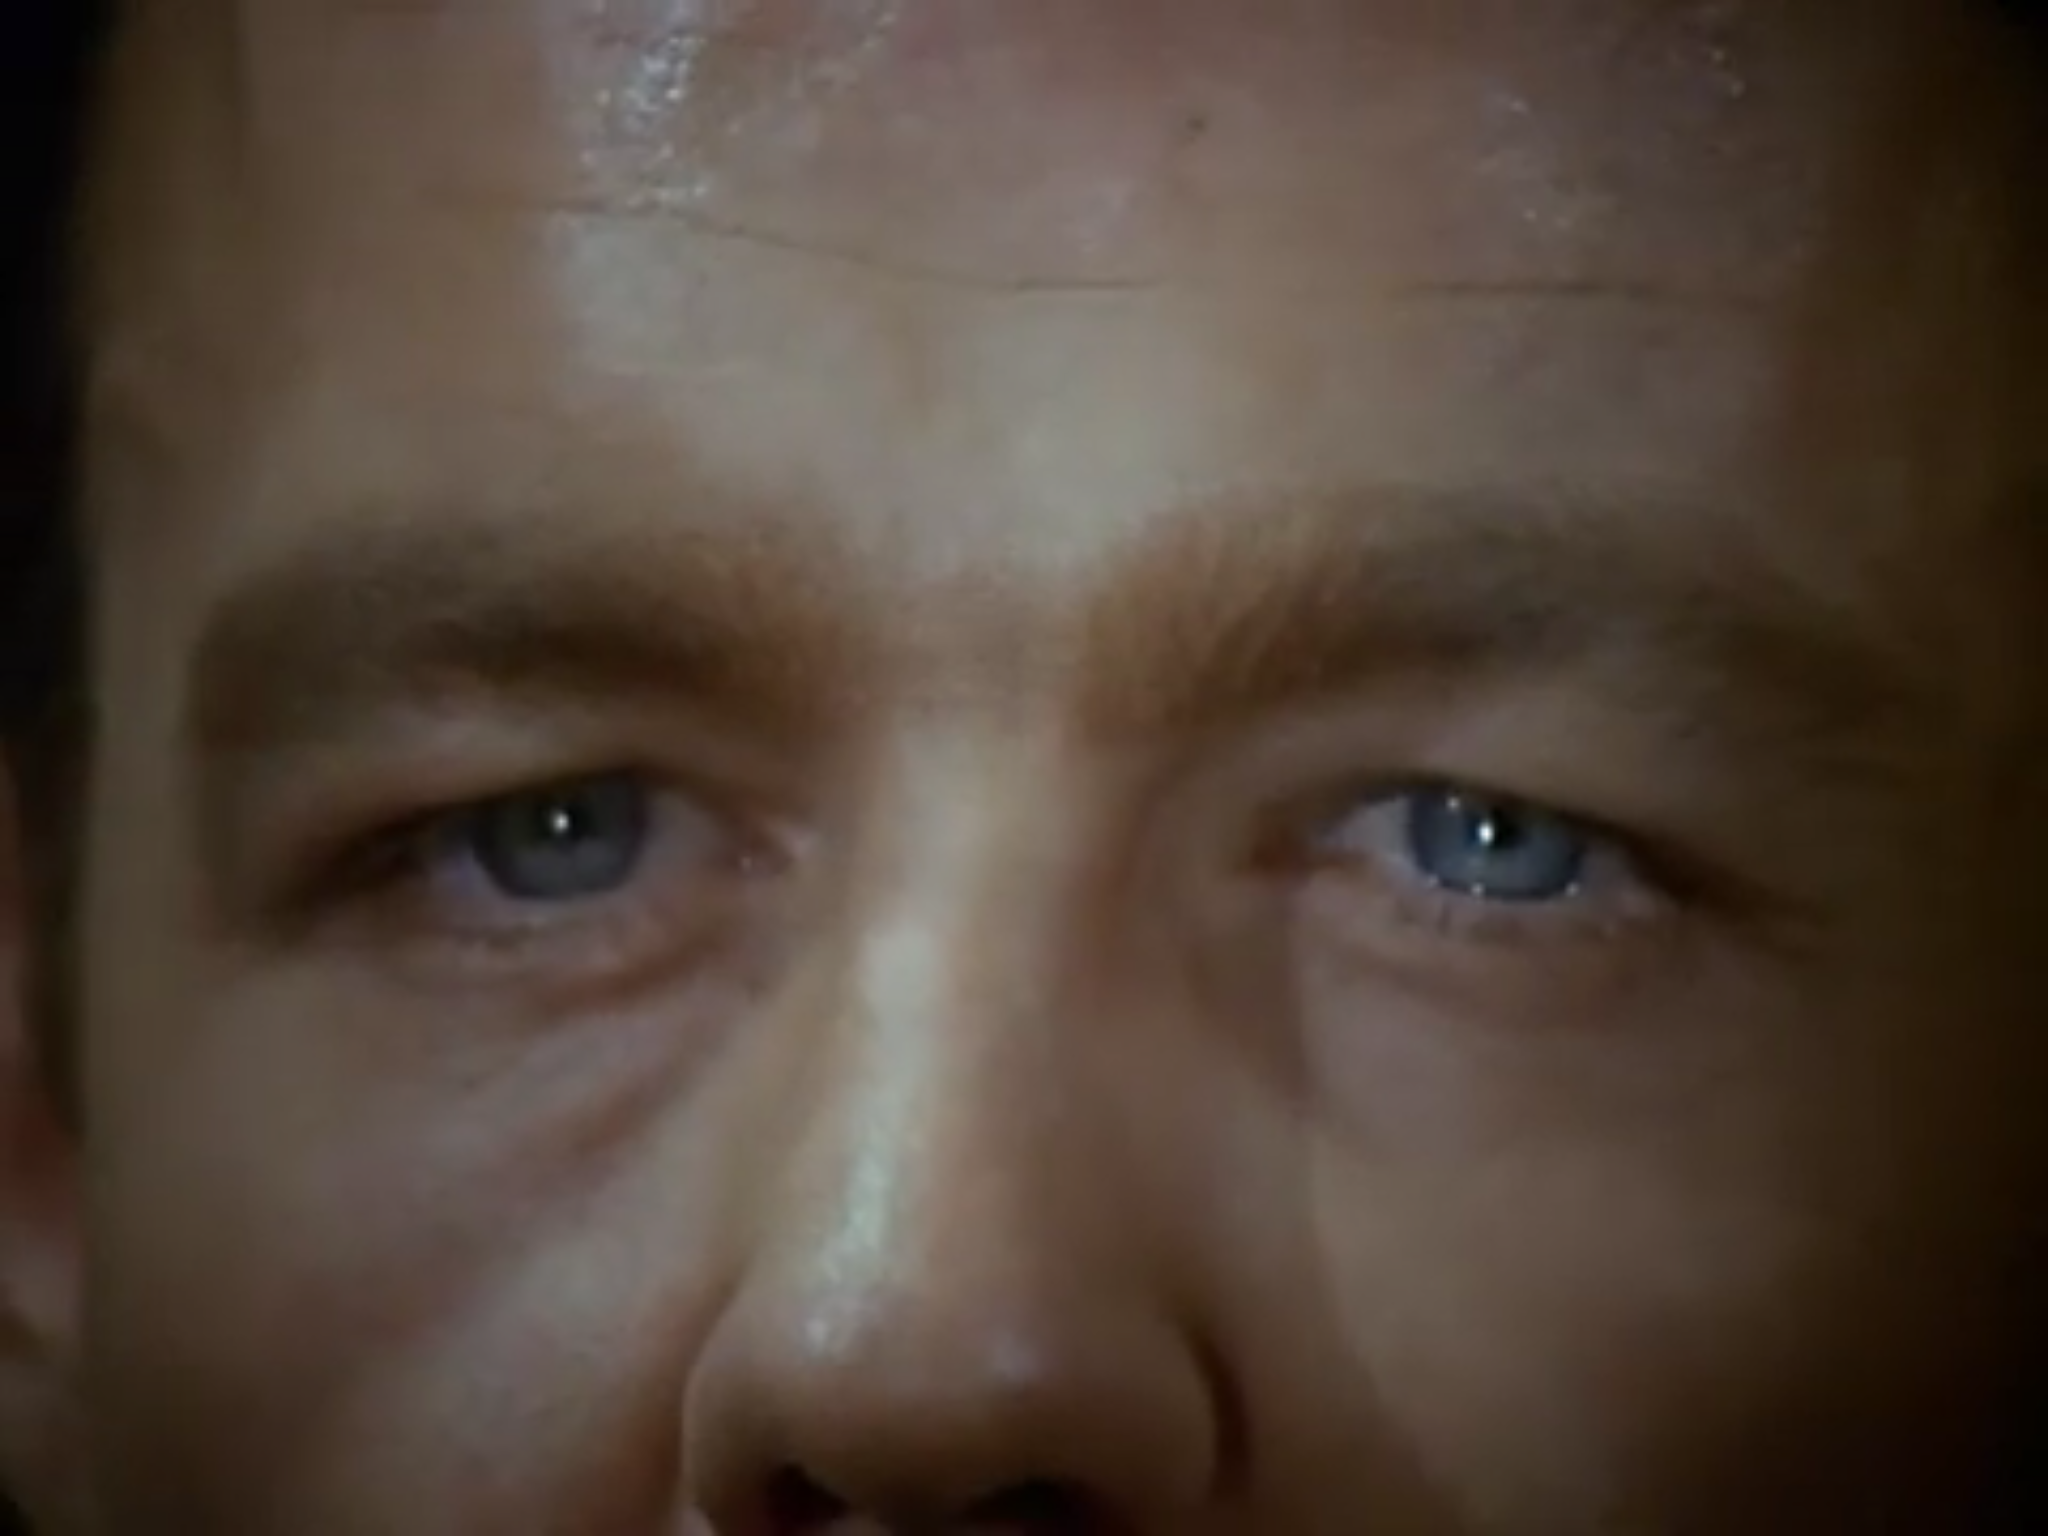 A screen capture of William Gaunt’s blue eyes, from the episode “To Trap a Rat” of “The Champions” from You Tube.